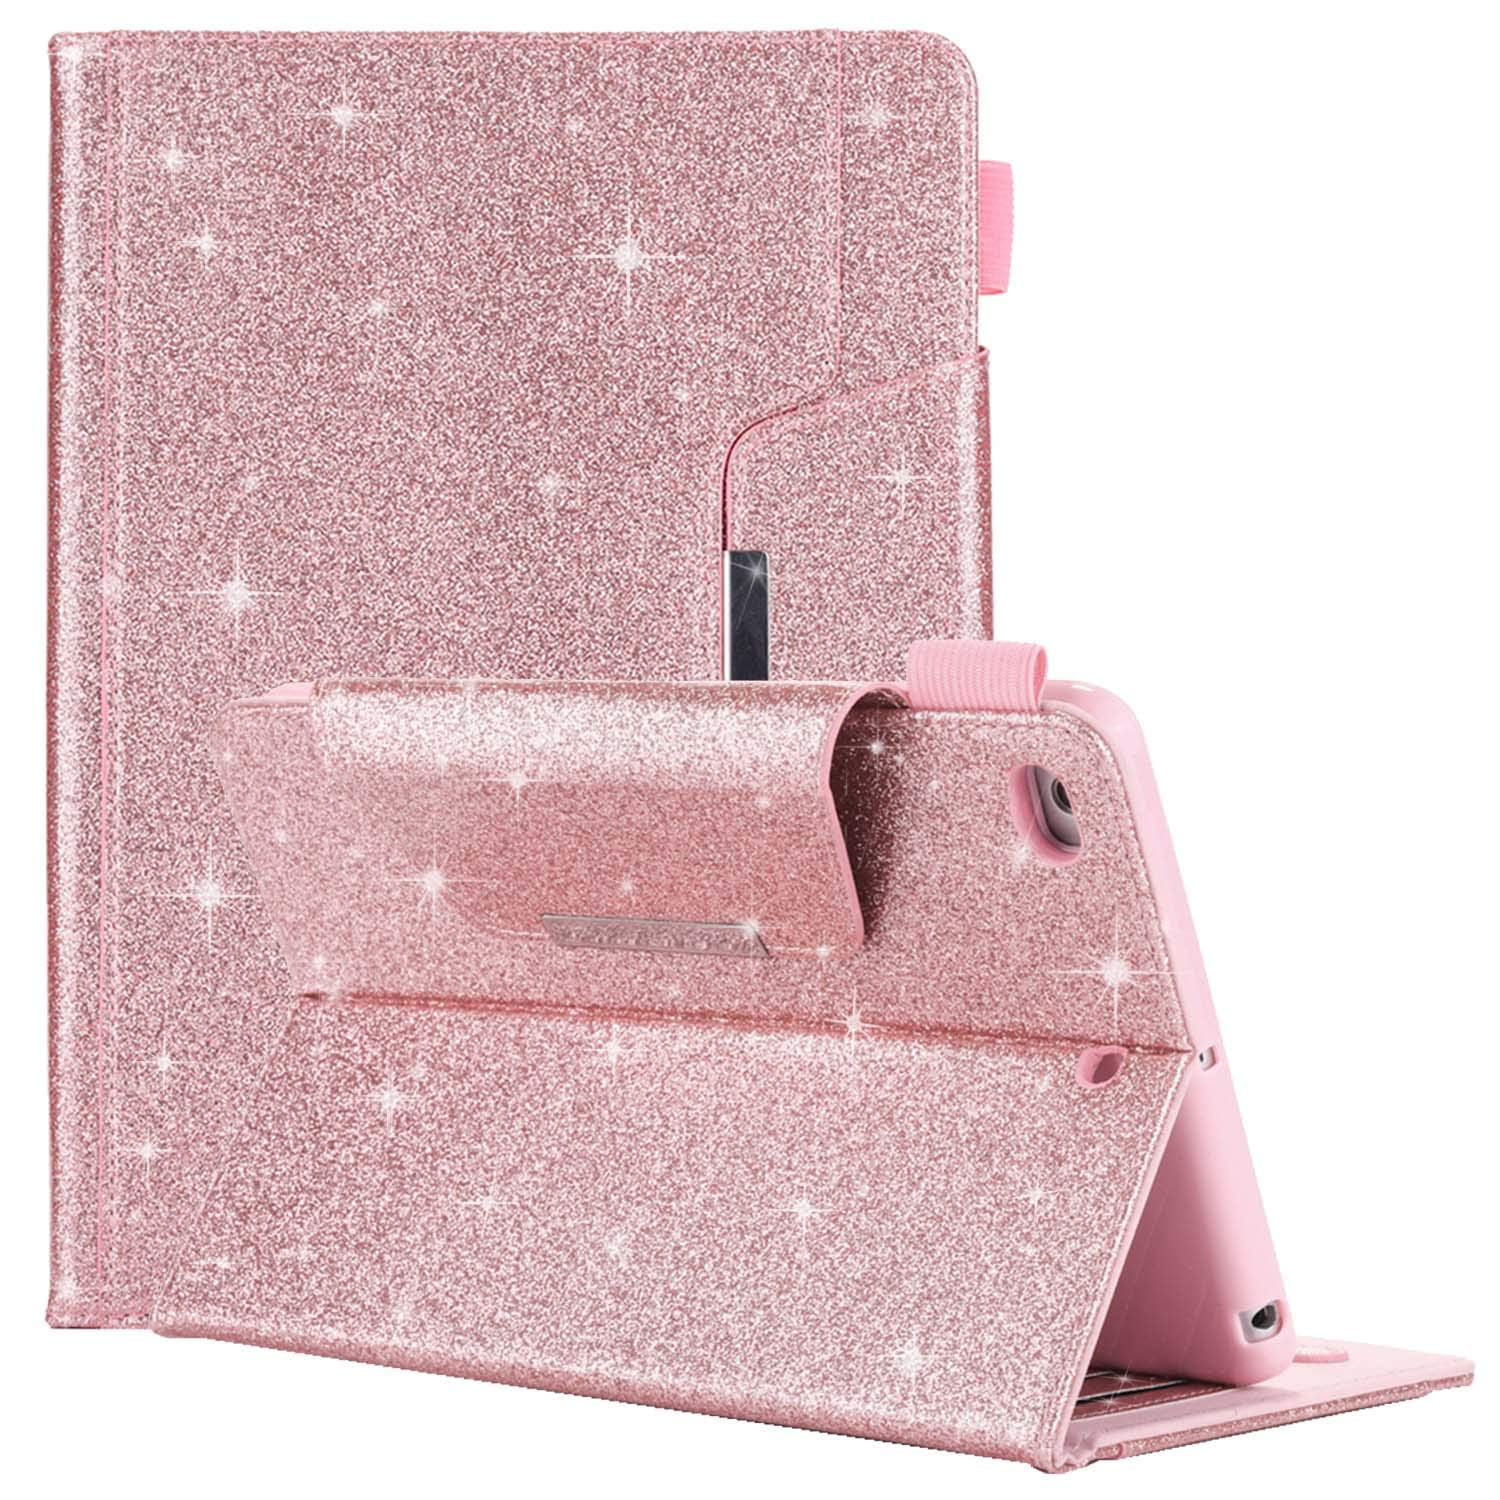 Rose Tower Leather Case for ipad Mini 4/3/2/1 with Pencil Holder,OYIME Glitter 3D Design Multi-Angle Viewing Stand Smart Magnetic Closure with Auto Sleep/Wake Feature Protective Case and Stylus Pen